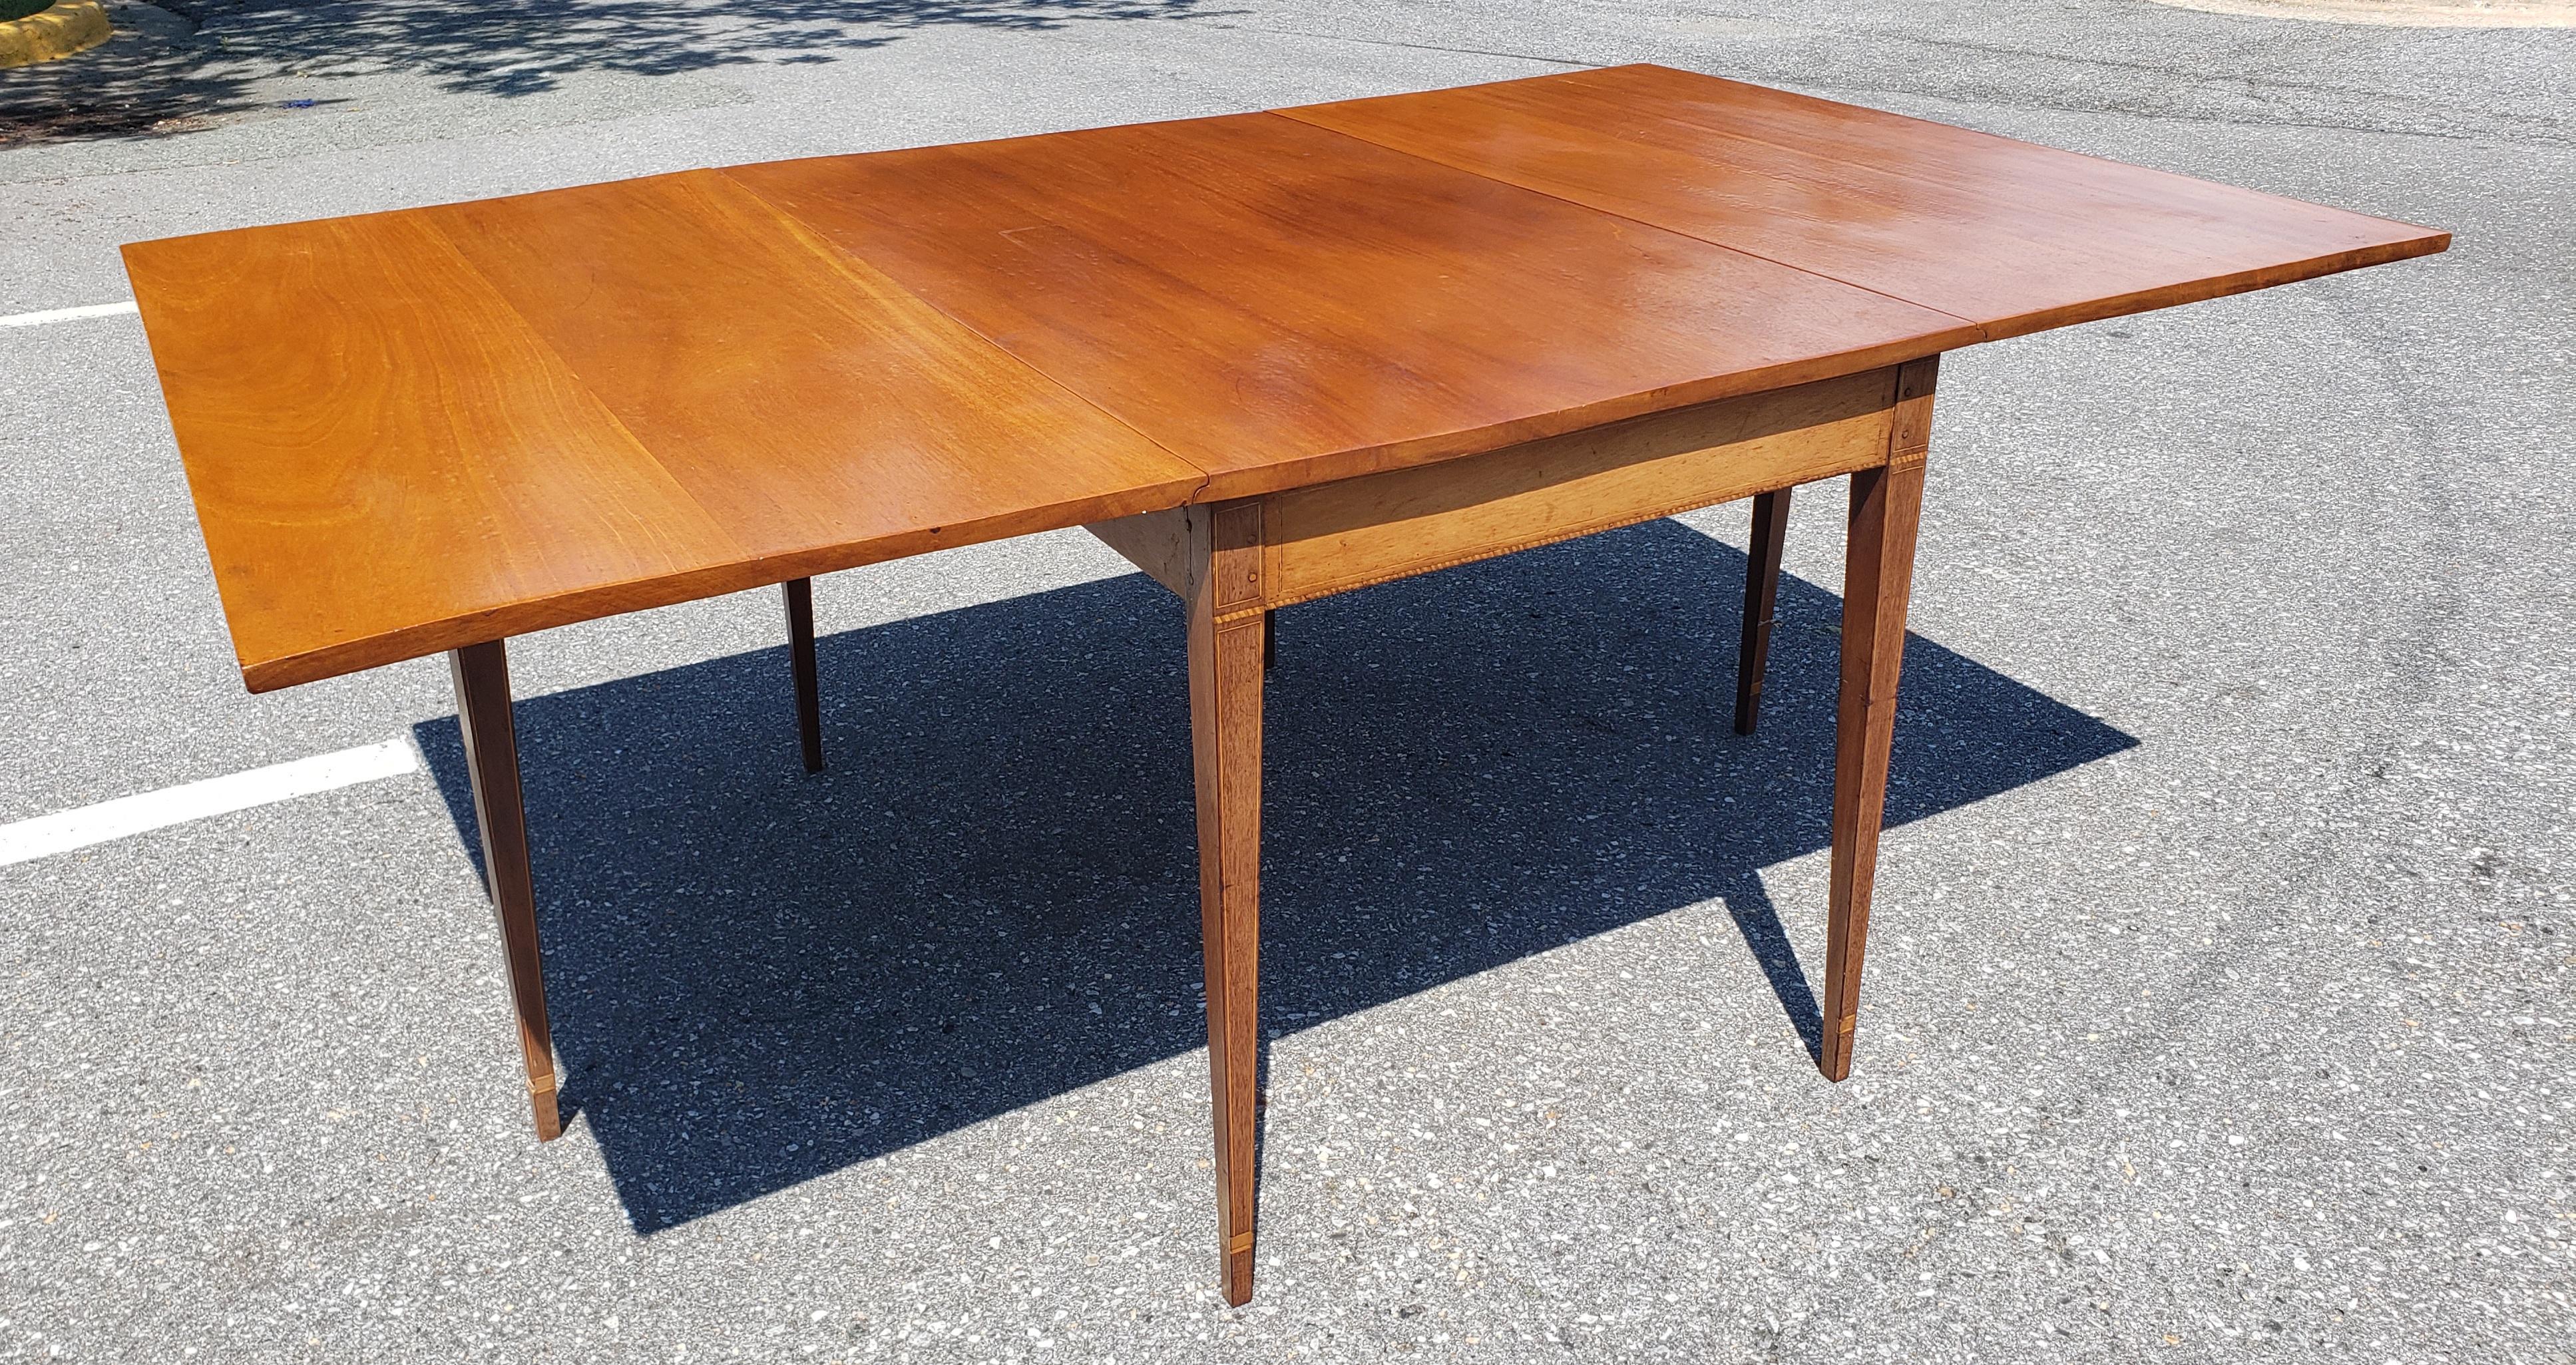 20th Century 1930s American Federal Mahogany And Satinwood Inlay Drop-Leaf Dining Table For Sale